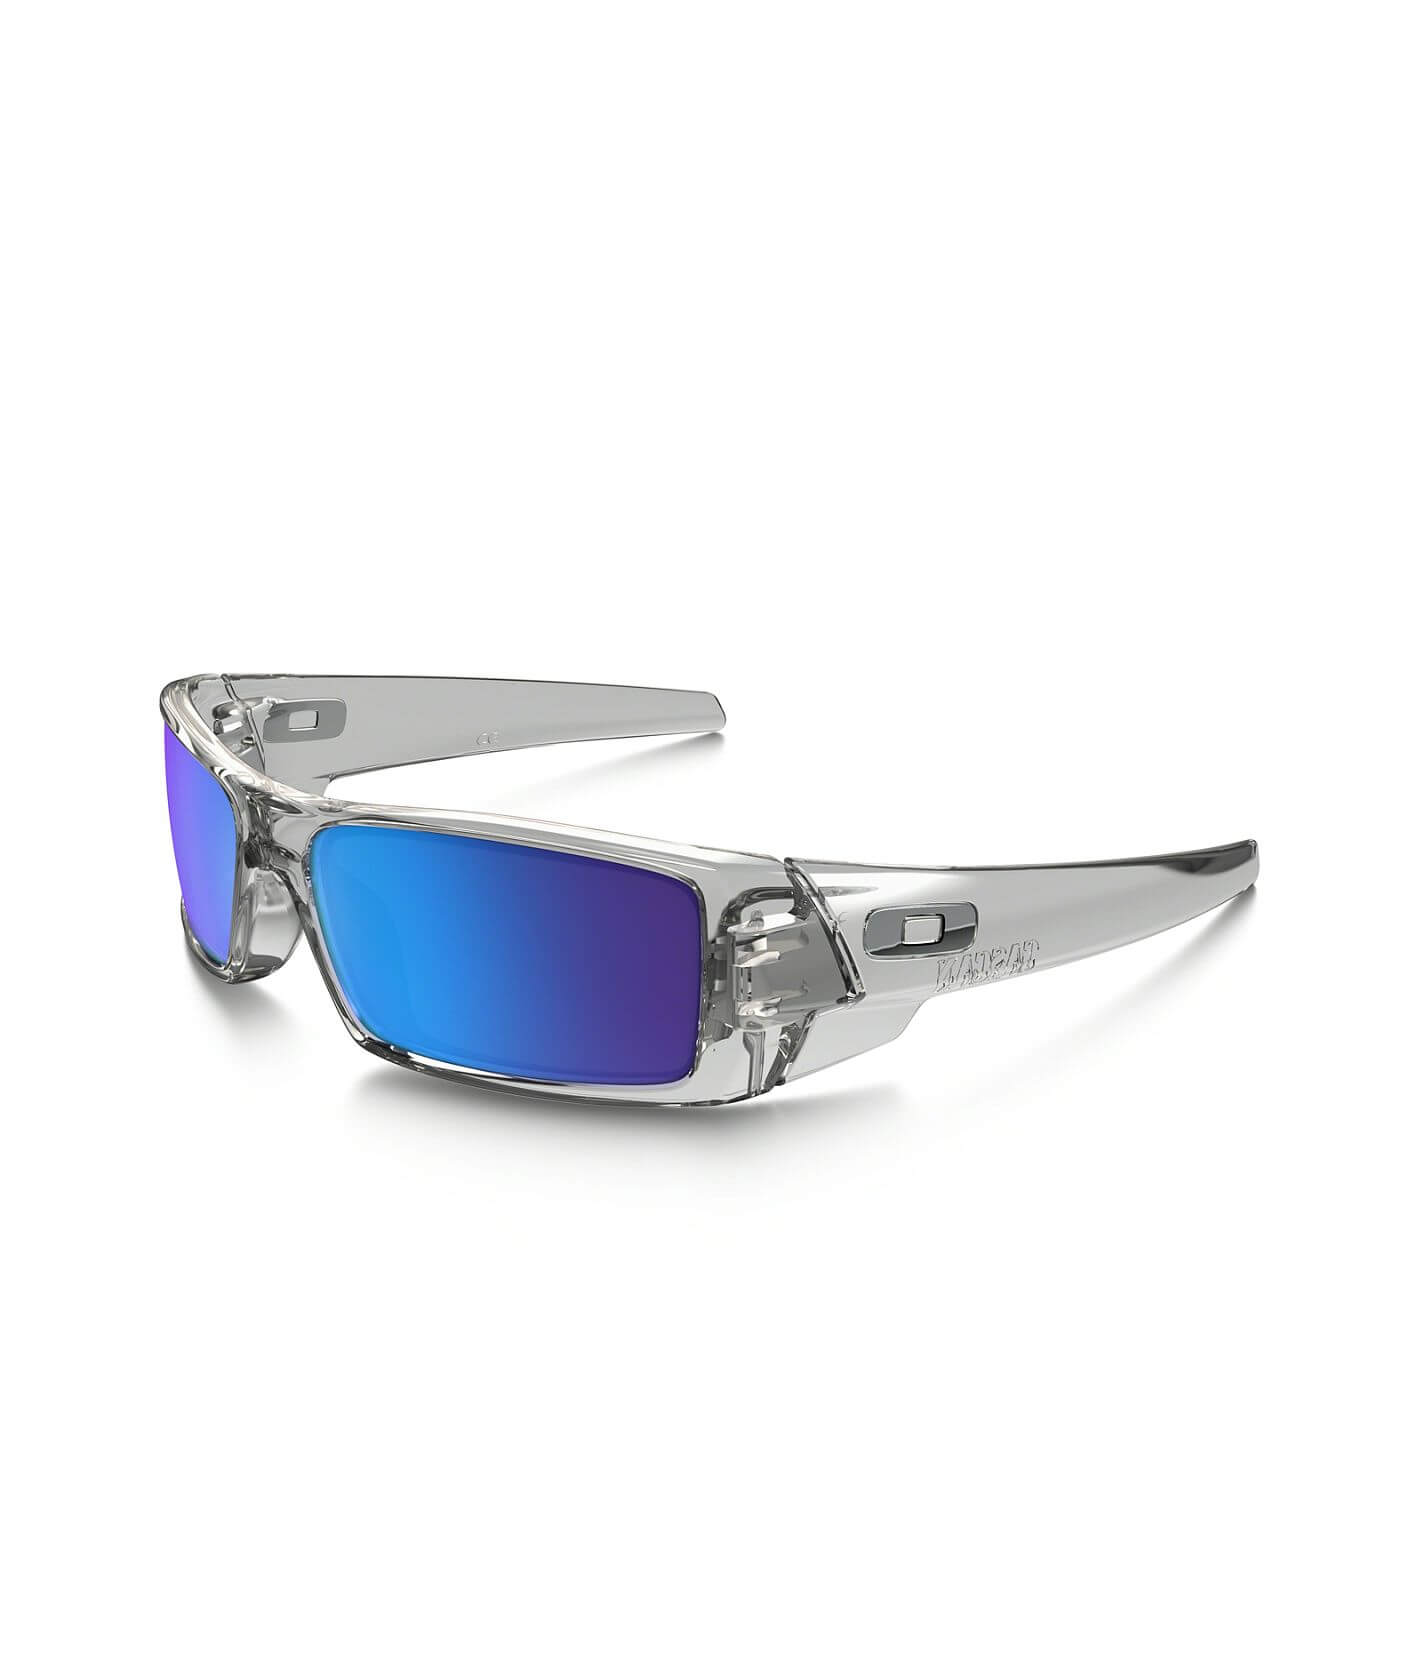 Oakley Gascan Sunglasses - Men's Sunglasses & Glasses in Polished Clear |  Buckle